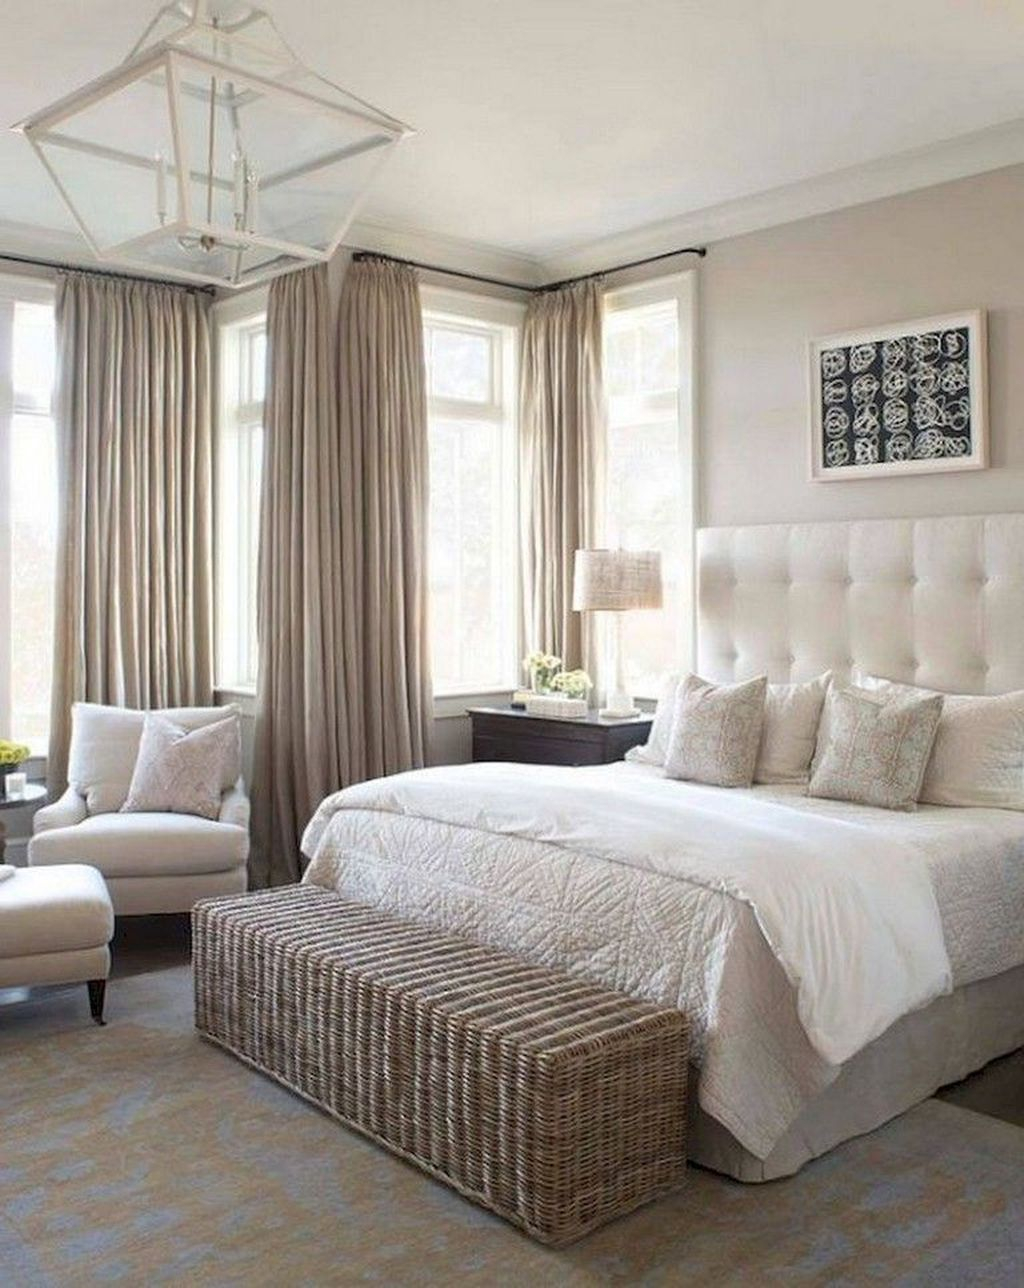 Extraordinary Master Bedroom Design Ideas You Have To Try 15